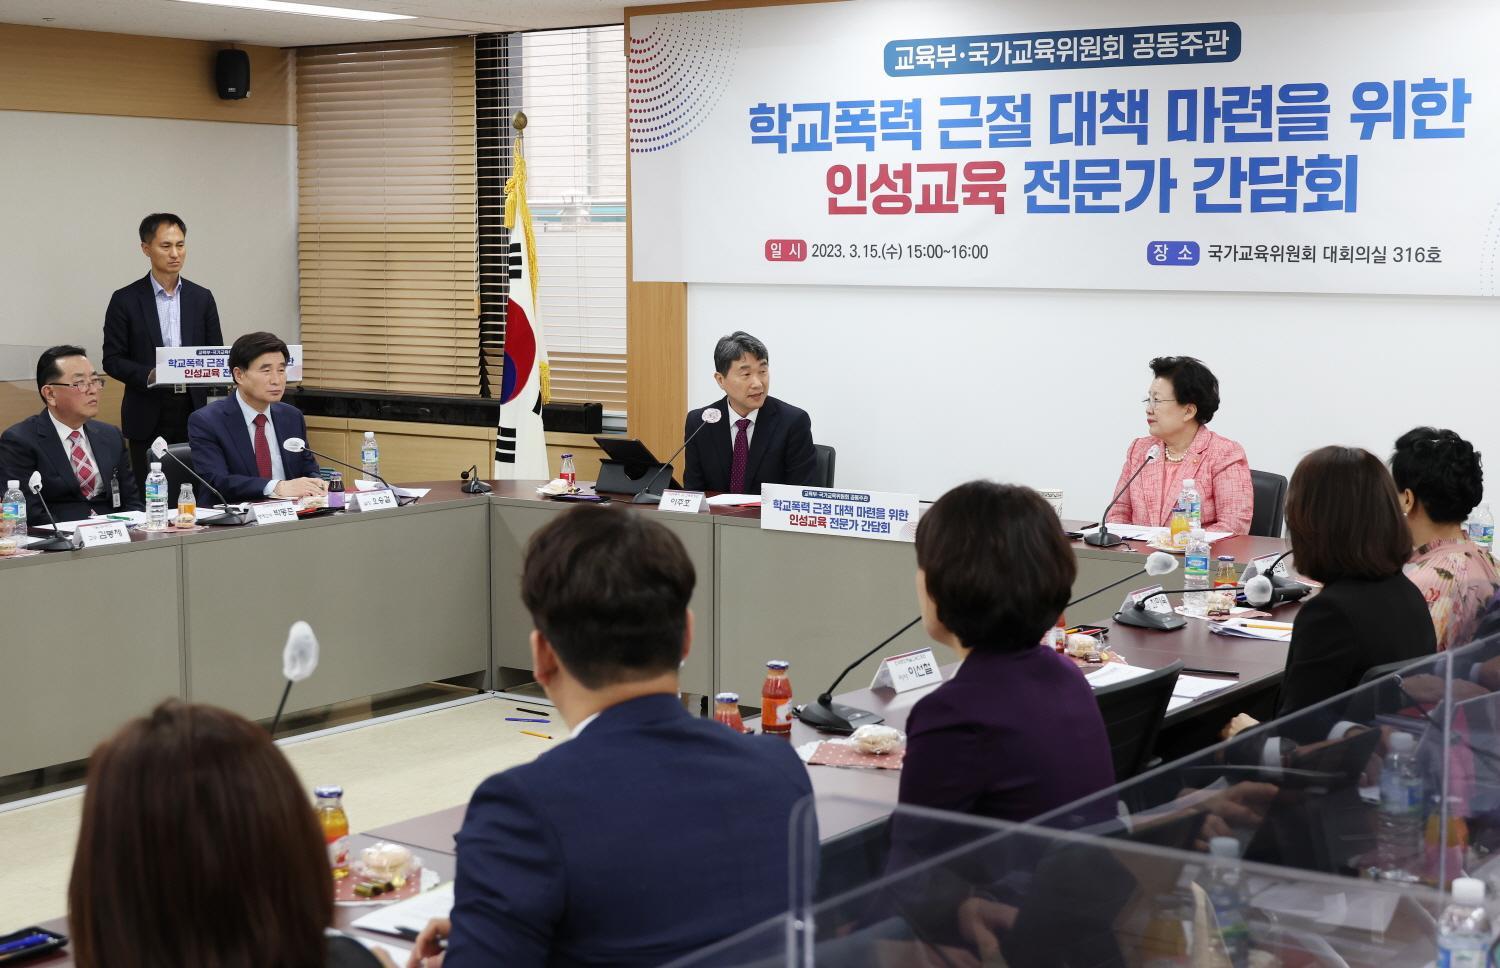 230315_Meeting with character education experts to eradicate school violence(3)